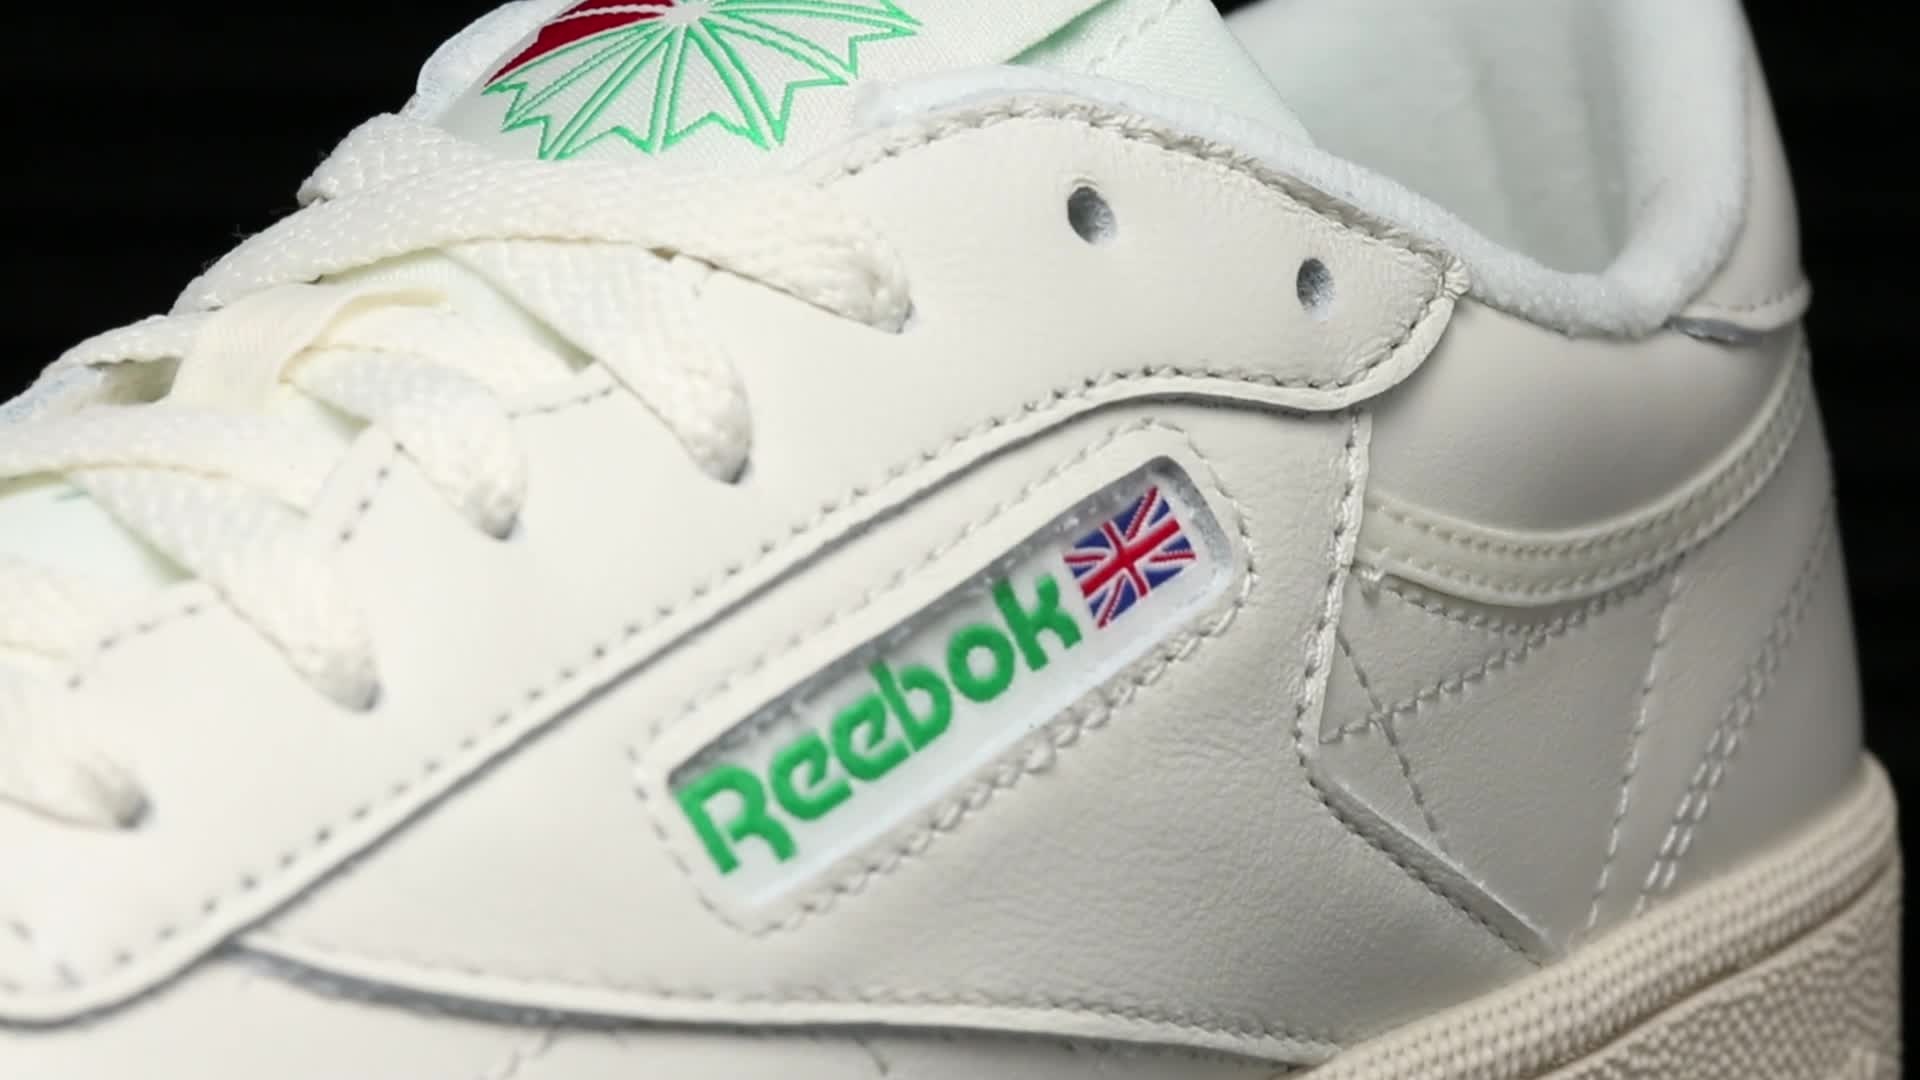 Reebok: Club C 85, The brand of sneakers, A subsidiary of Adidas. 1920x1080 Full HD Wallpaper.